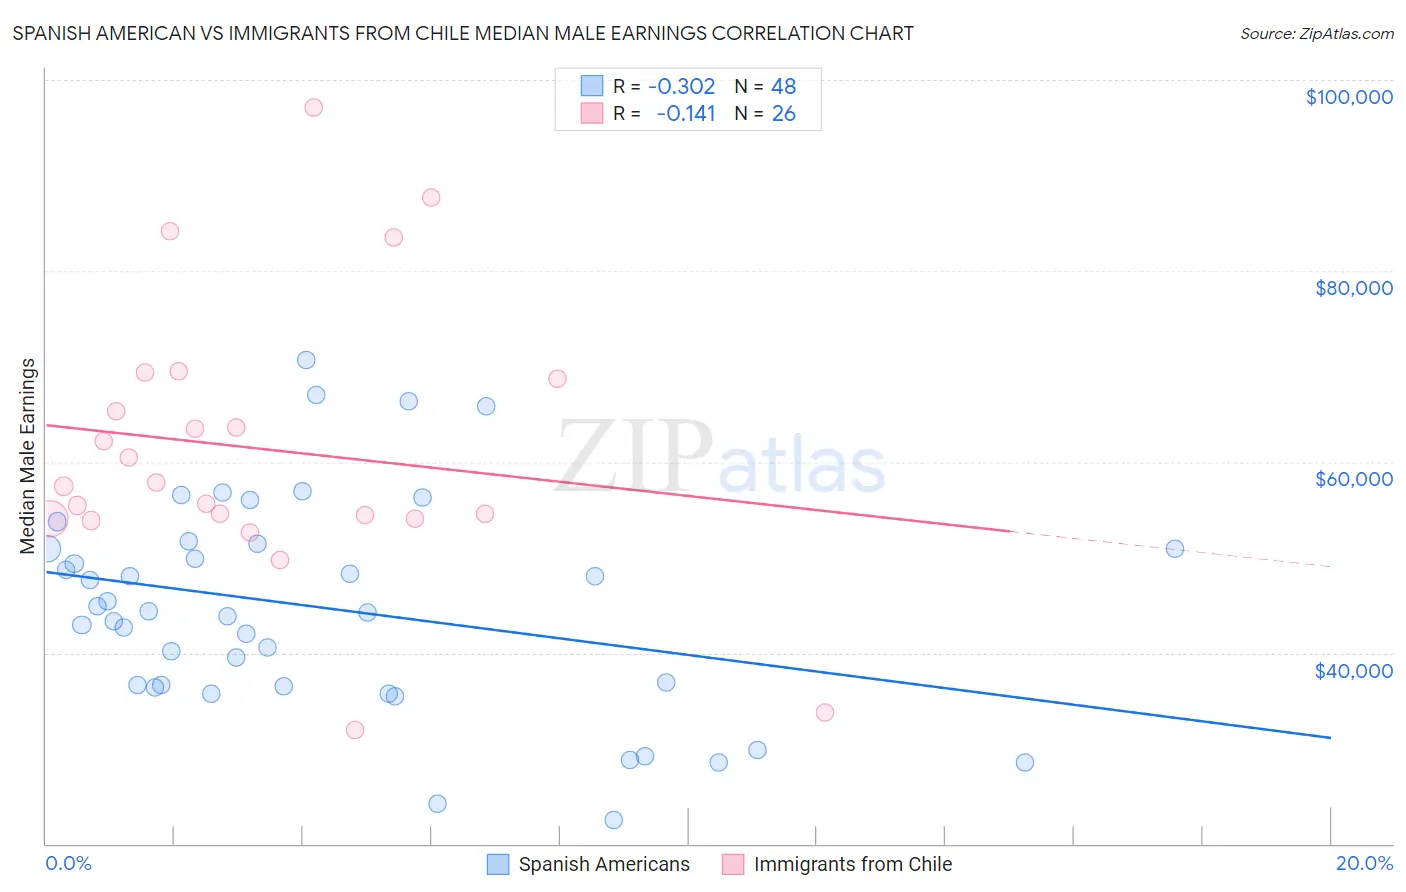 Spanish American vs Immigrants from Chile Median Male Earnings